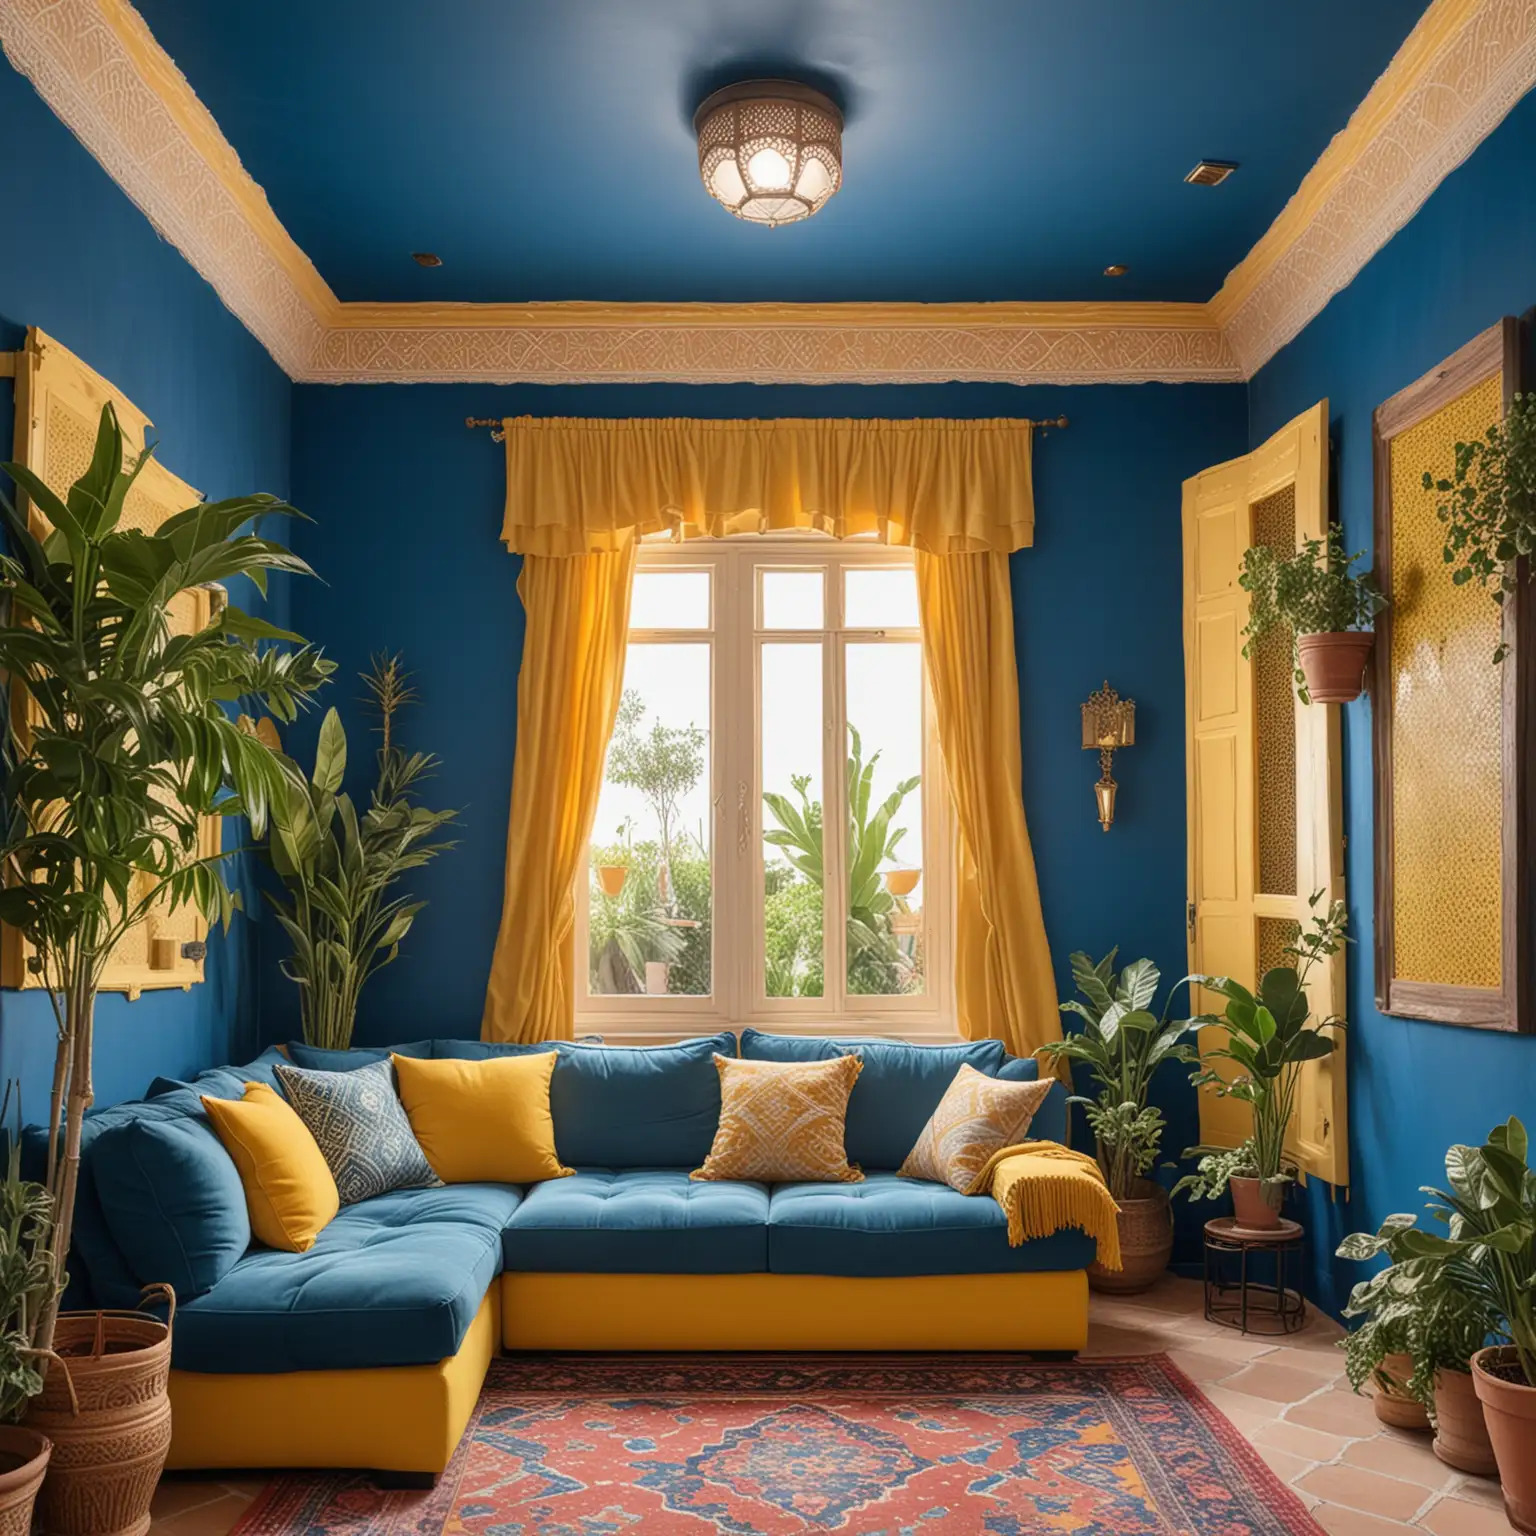 home theater small room, projector screen, one window, cozy, Moroccan inspired, vivid blue painted walls, yellow soundproof panels in wall, cozy small sofa, artificial plants, cute paintings hanging on the walls.